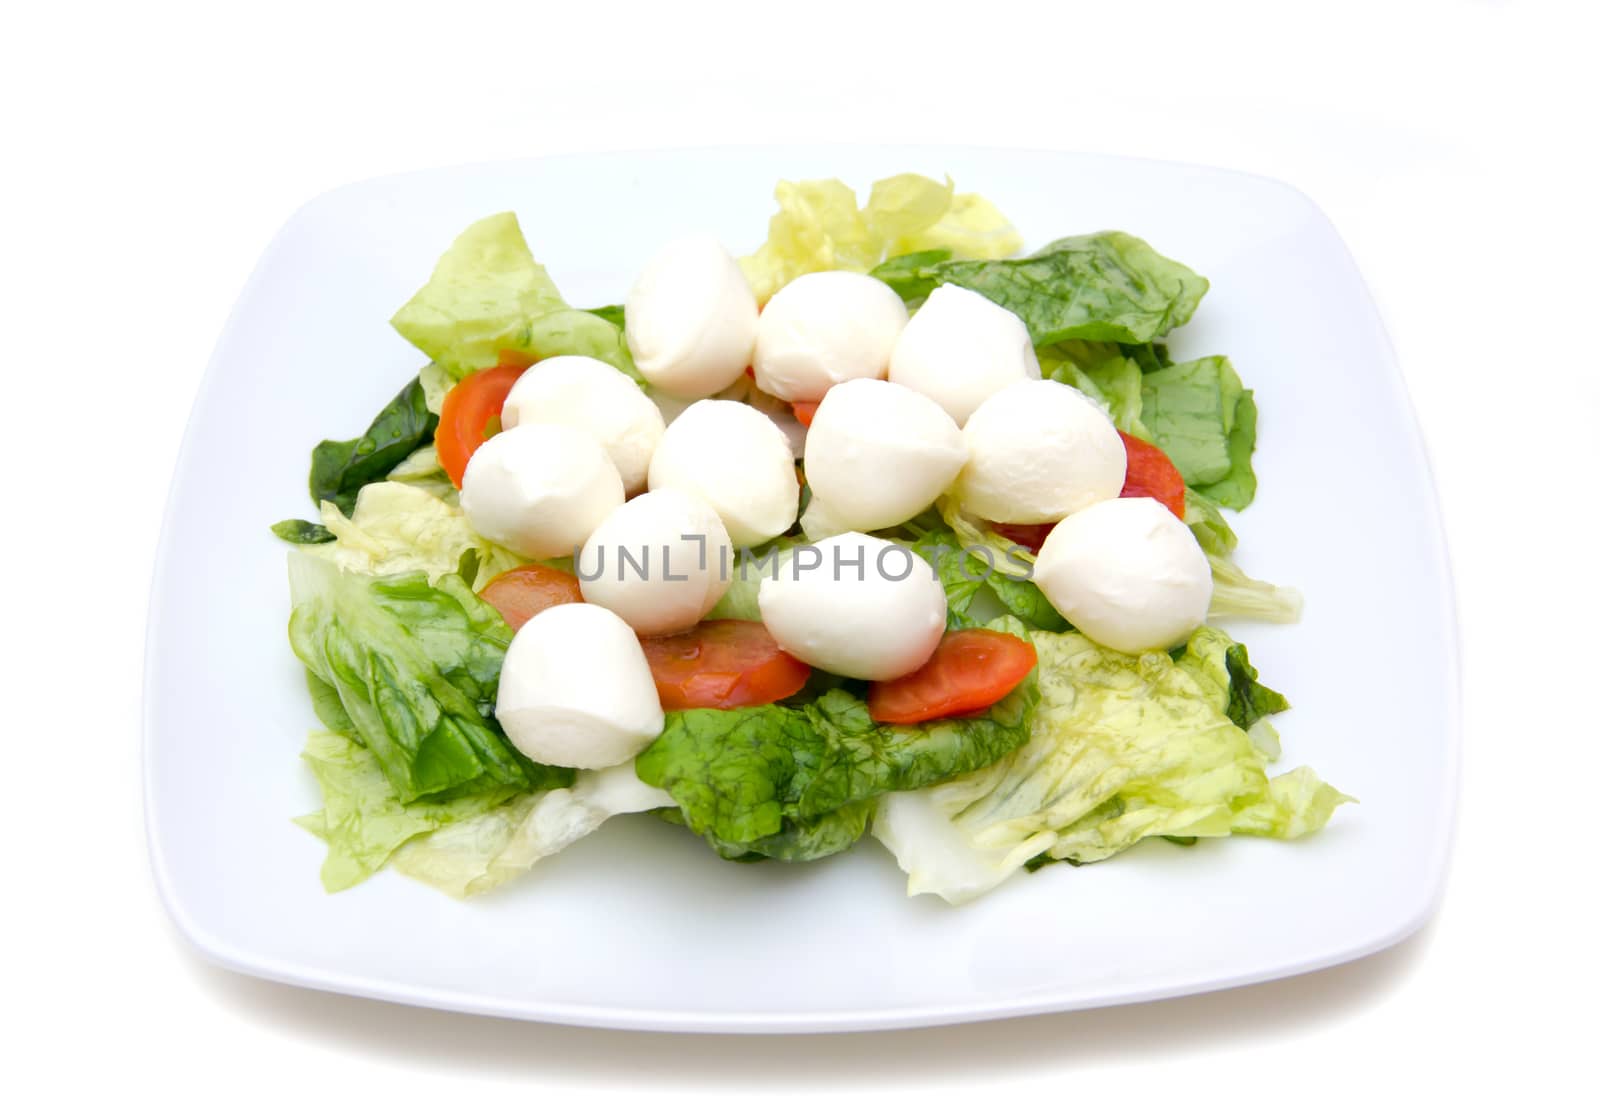 Salad with tomatoes and mozzarella on a white background